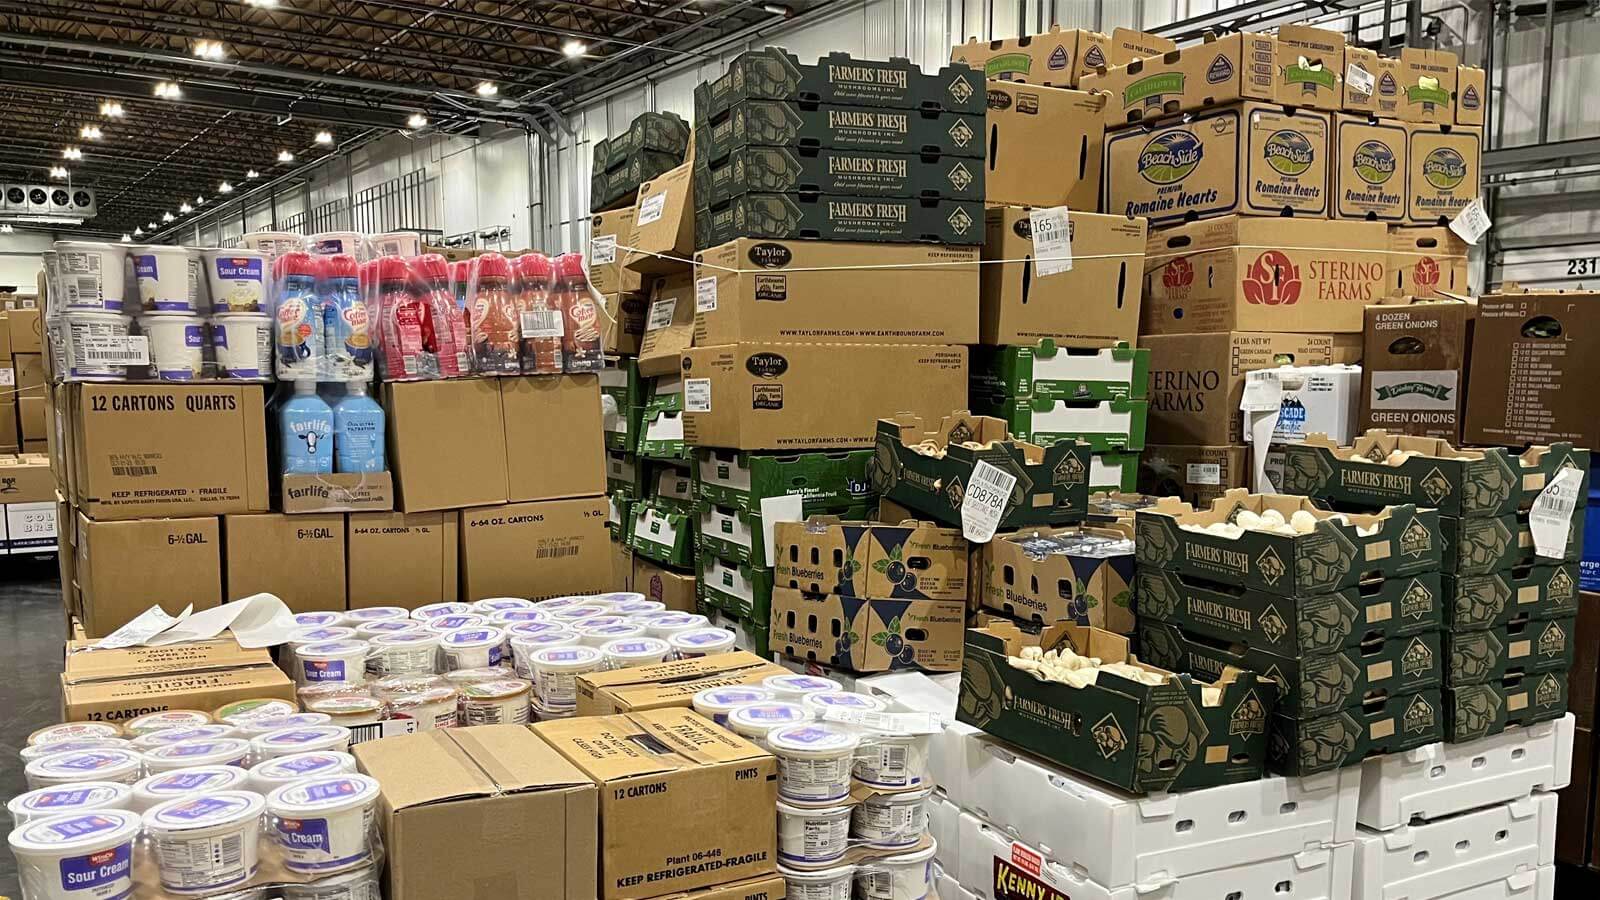 Cases of produce items such as dairy, mushrooms, and lettuce on pallets in a temperature-controlled, cold storage distribution center.